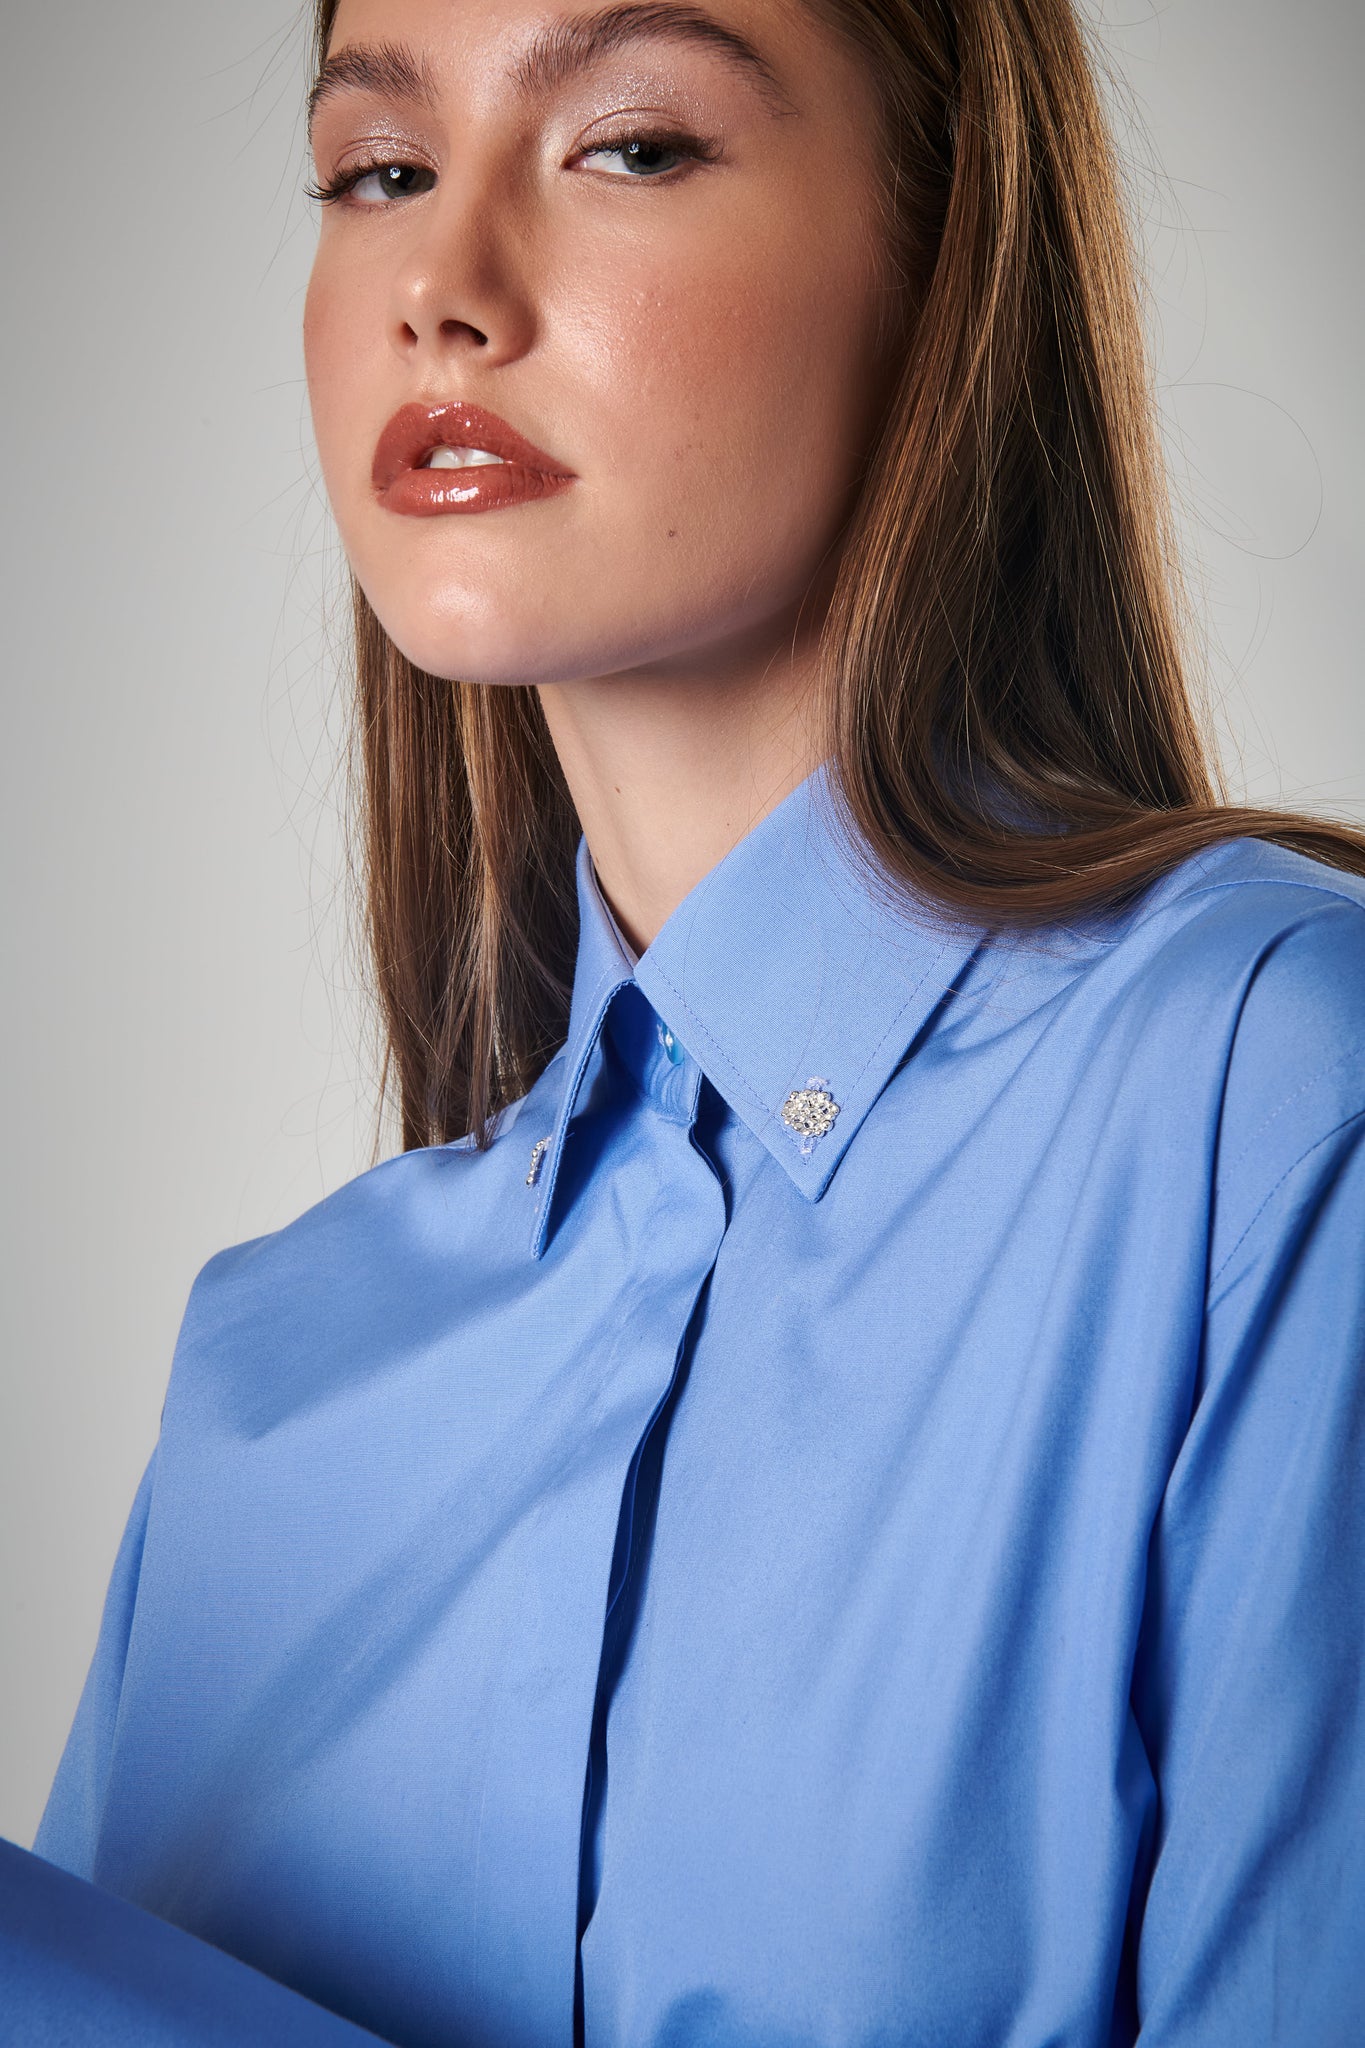 Signature Button-Up with Cuffs with Hidden Buttons (Royal Blue)